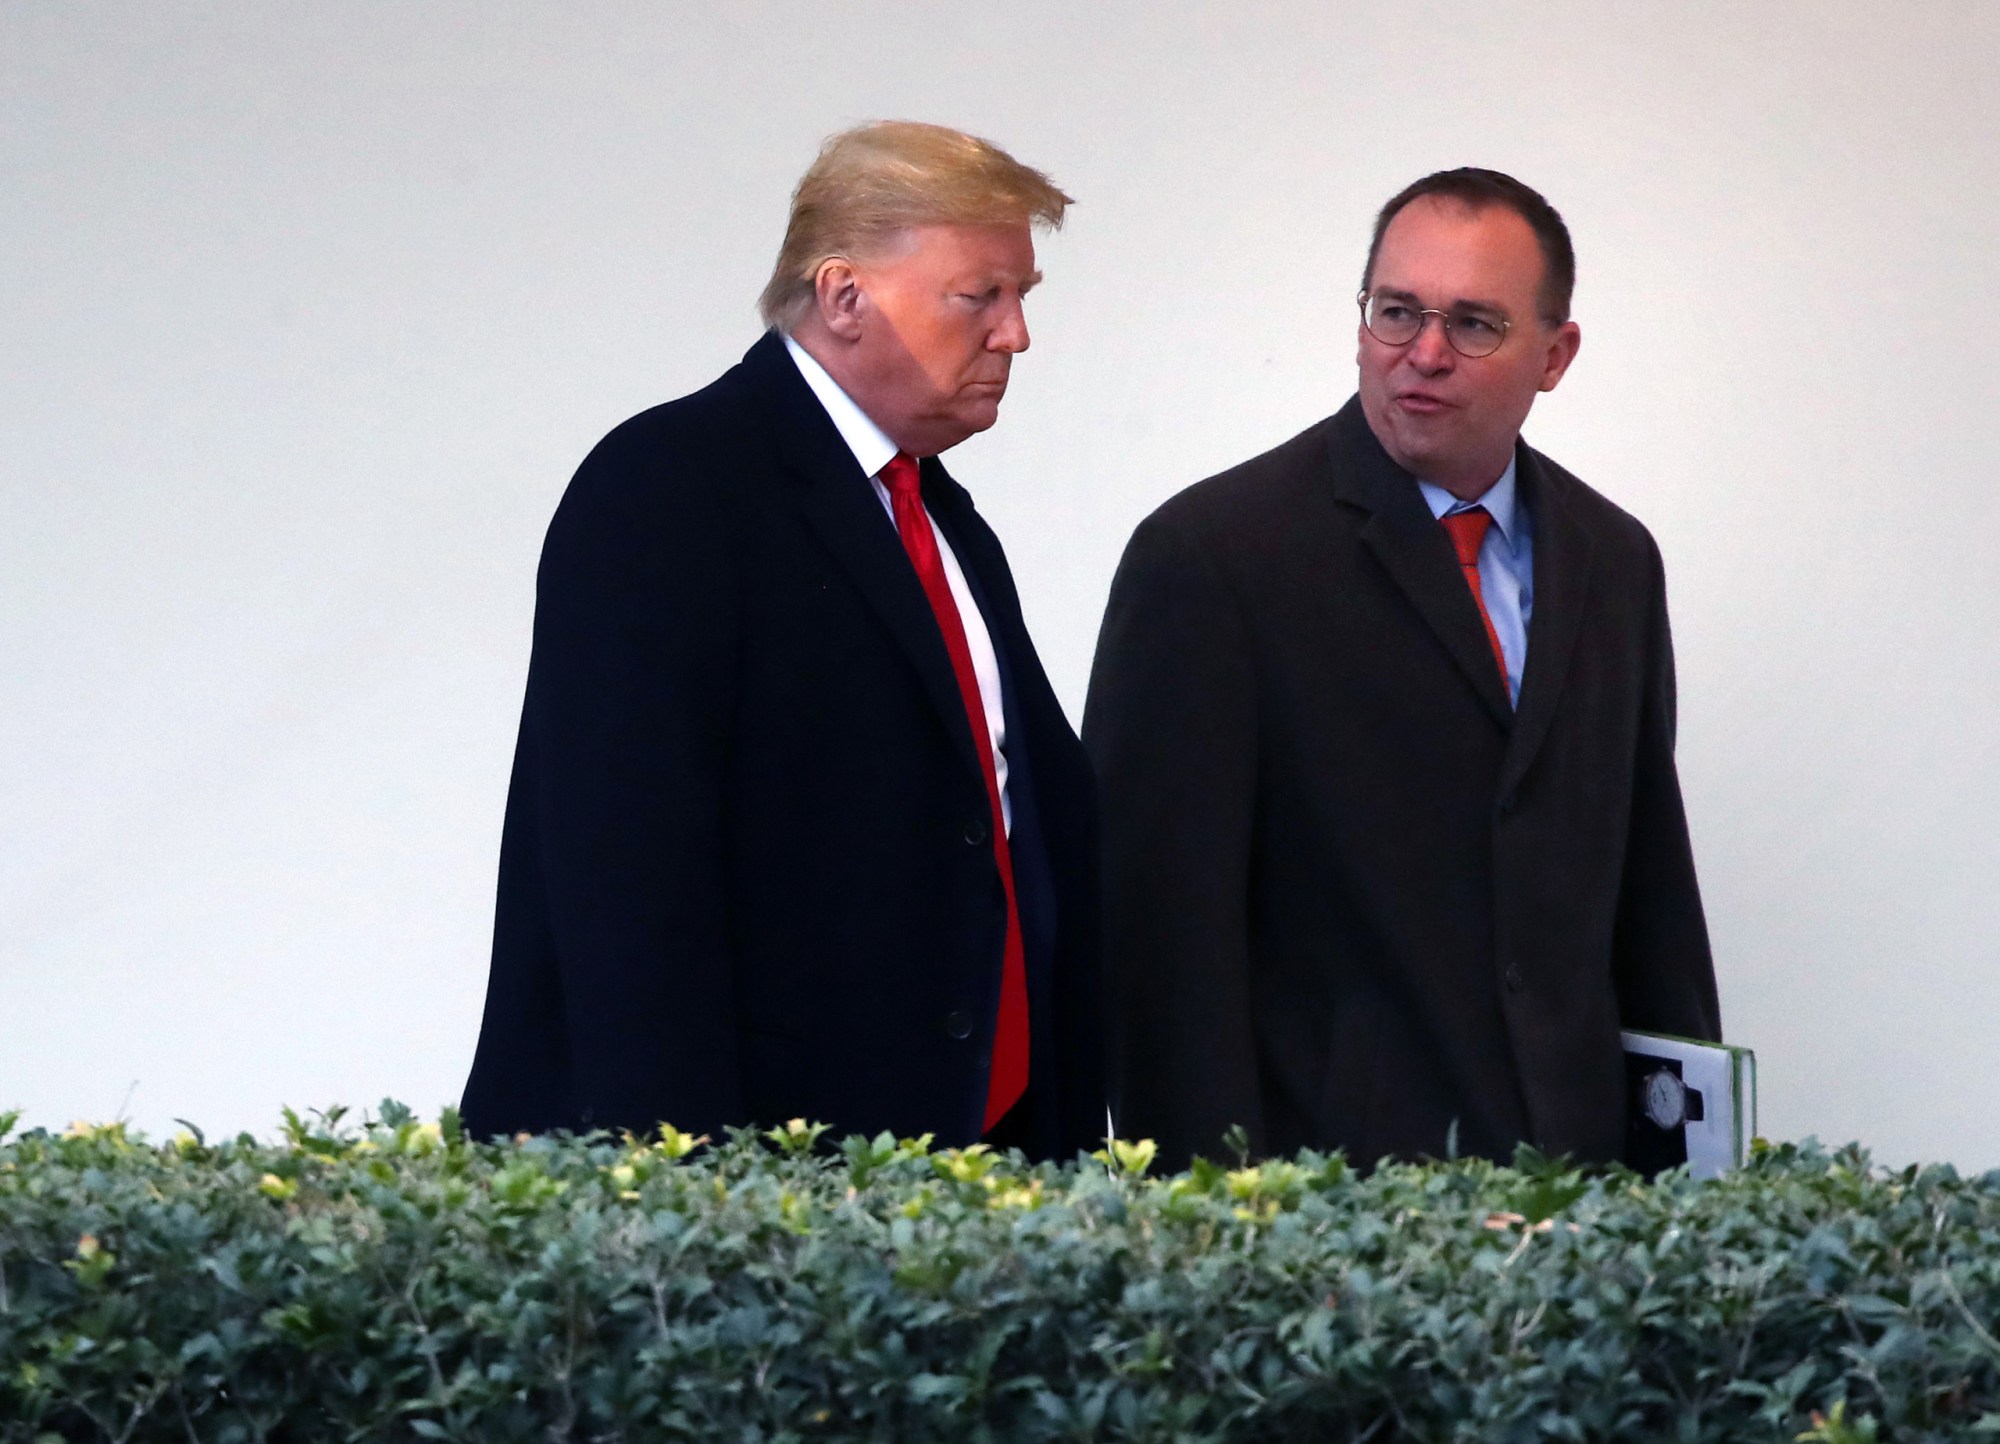 President Donald Trump walks along the West Wing Colonnade with acting White House chief of staff Mick Mulvaney, January 2020. (Getty/Mark Wilson)